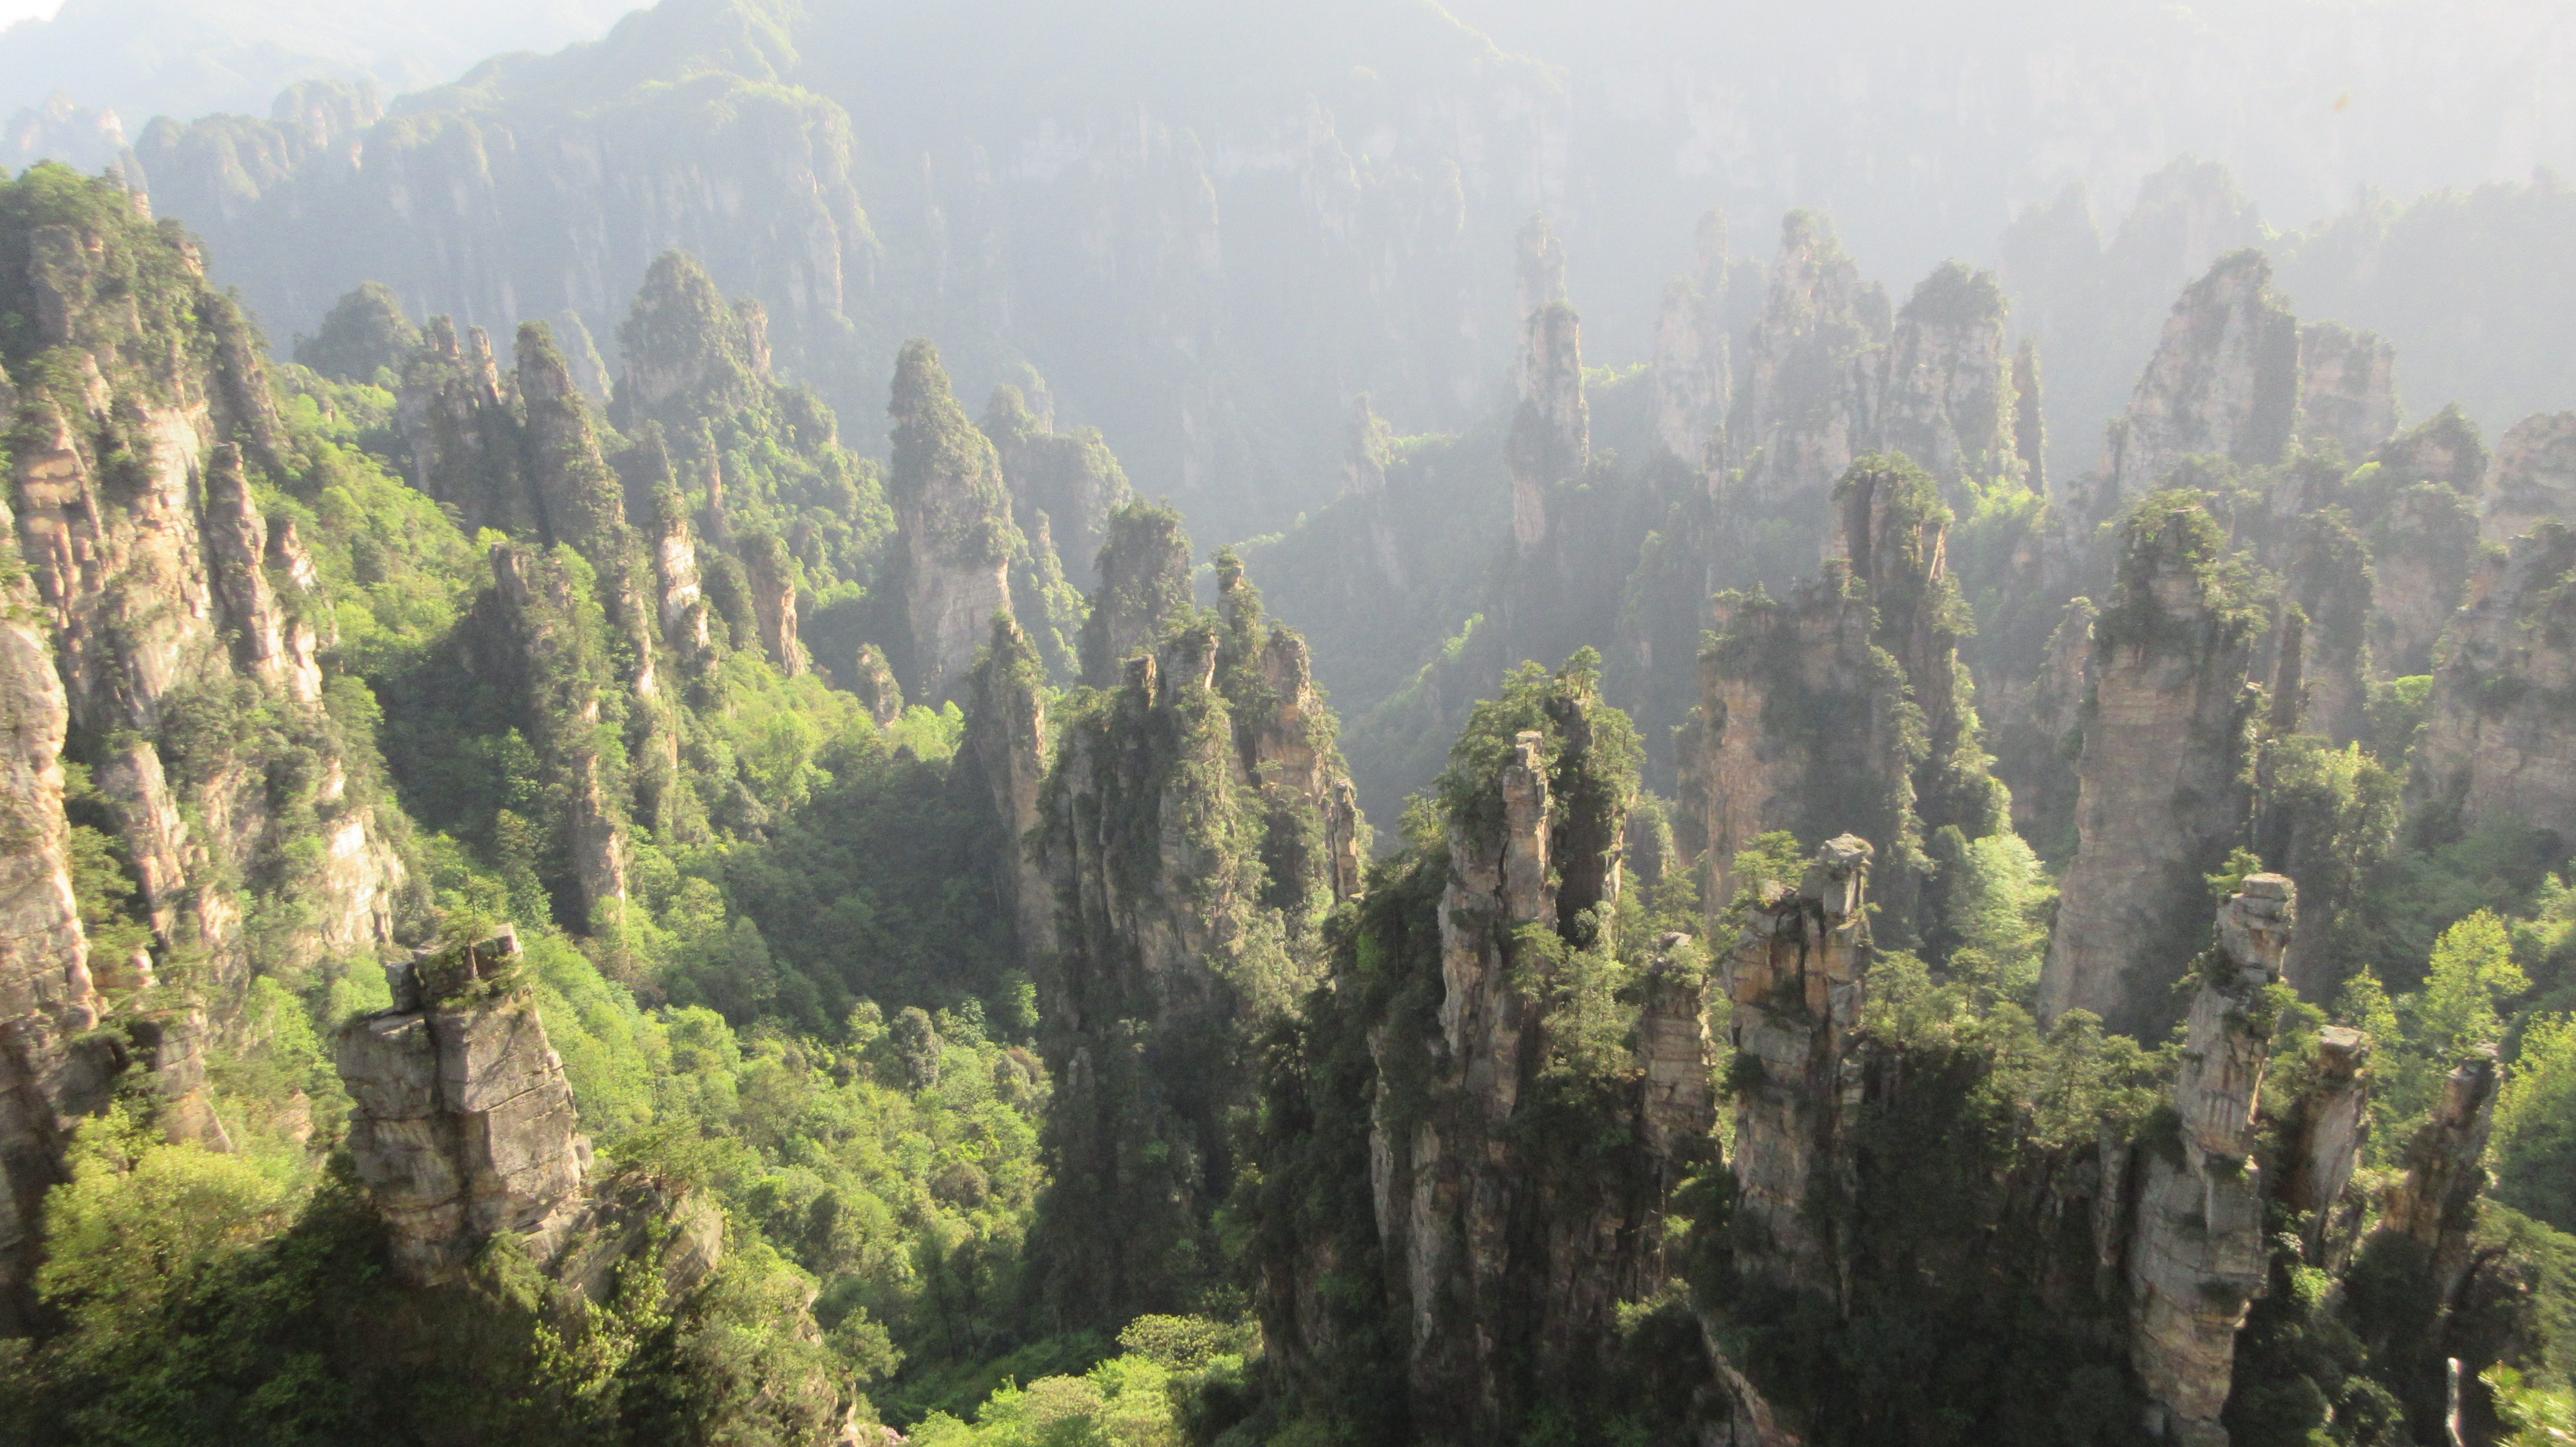 AVATAR. The stone pillars of Zhangjiajie are reminiscent of the movie's landscapes. 